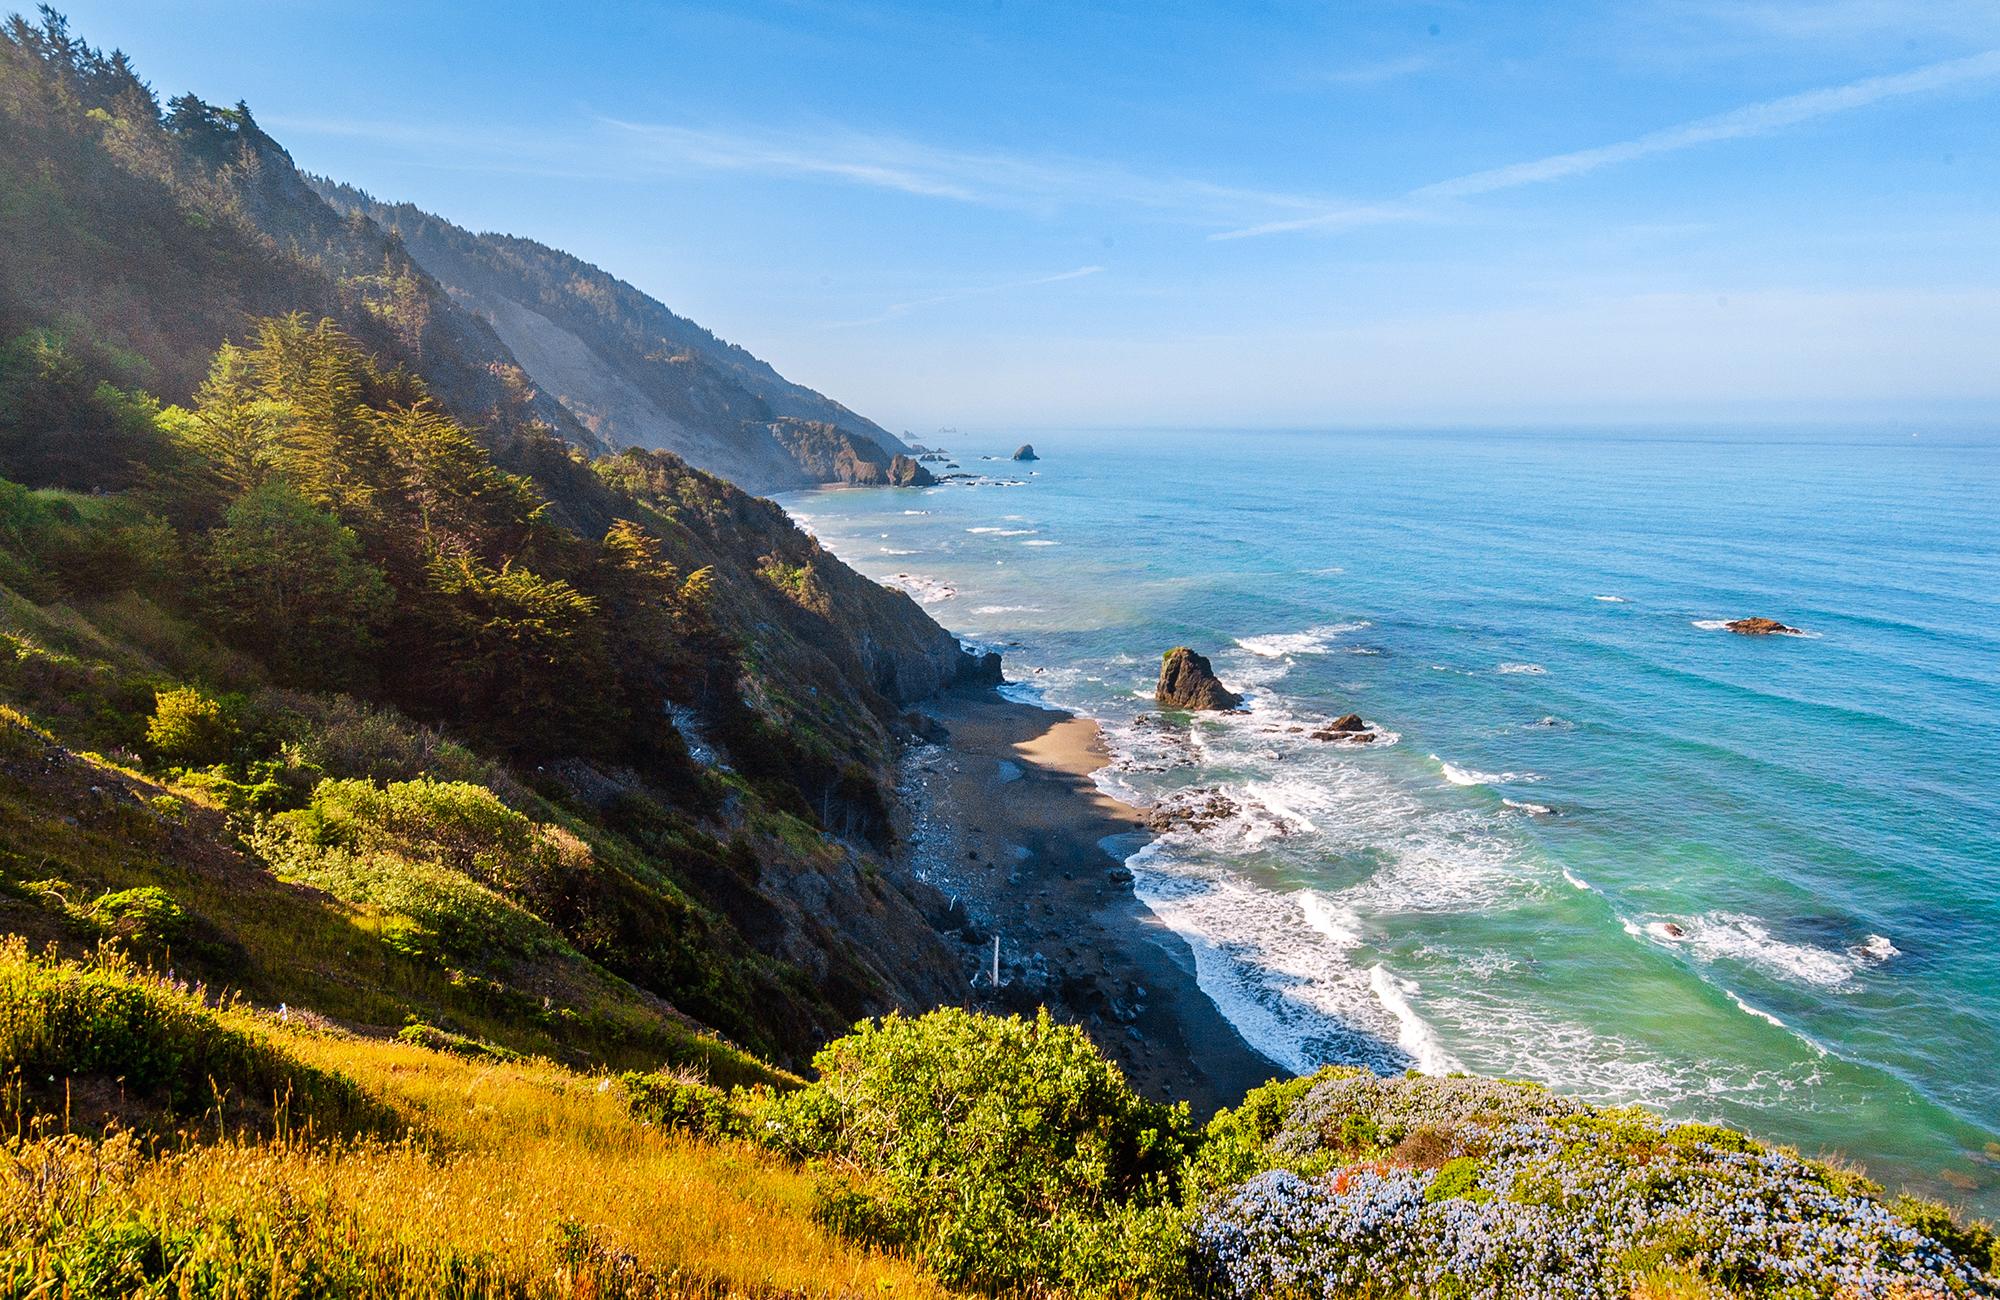 Scenic view of the North Coast of California, featuring the majestic redwood forest alongside the rugged Pacific oceanside